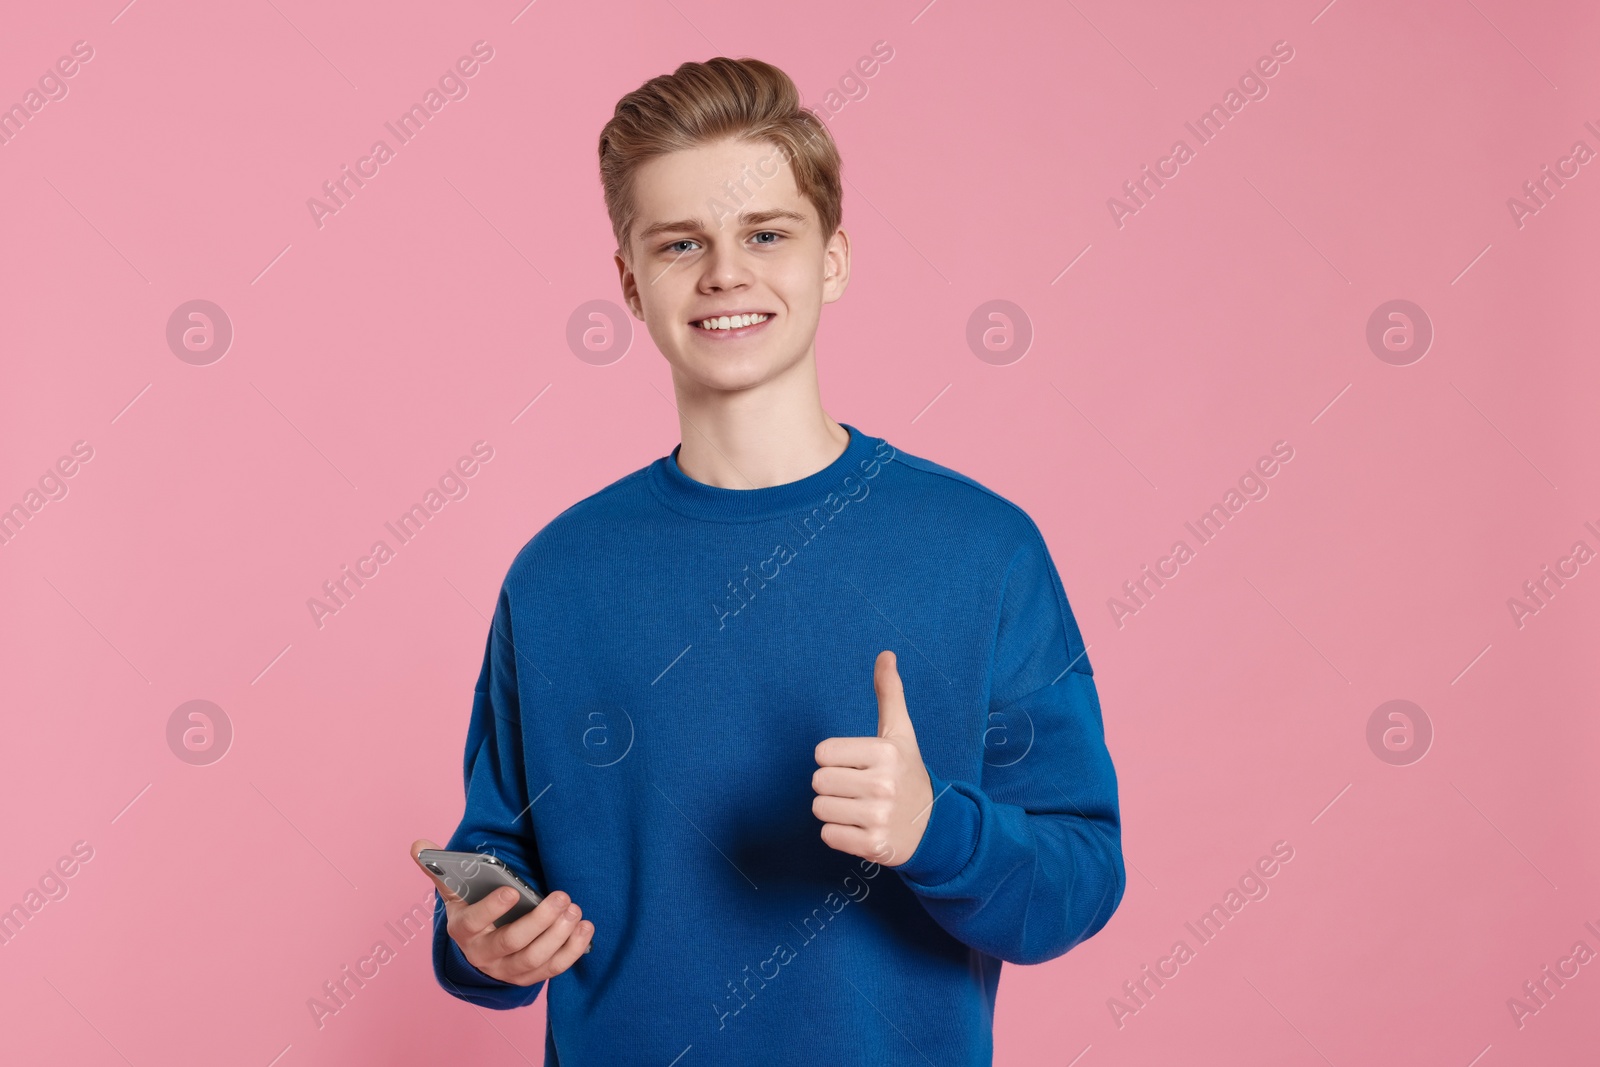 Photo of Teenage boy with smartphone showing thumb up on pink background